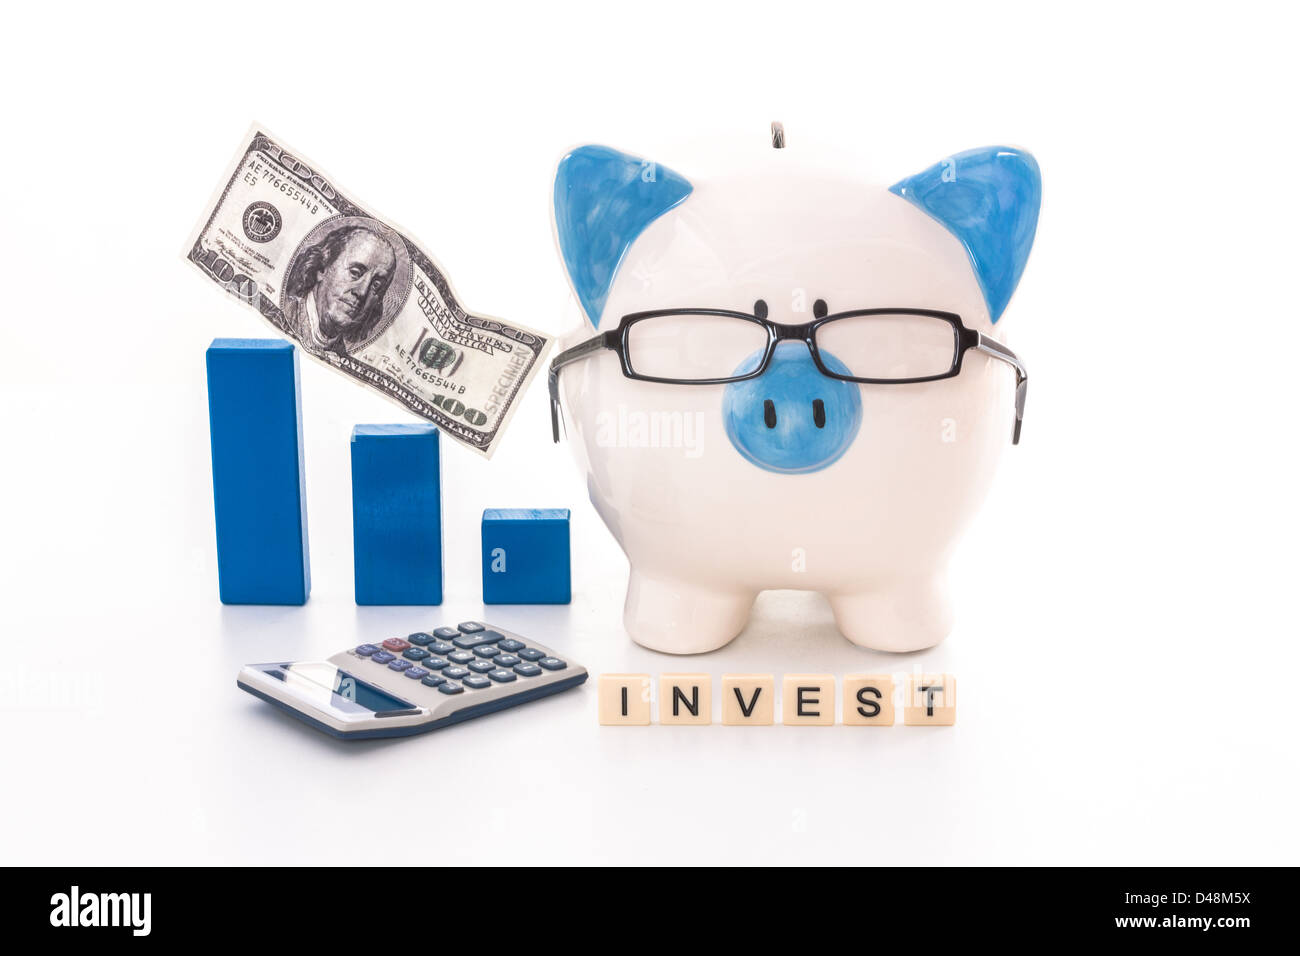 Blue and White piggy bank wearing glasses avec investir message Banque D'Images